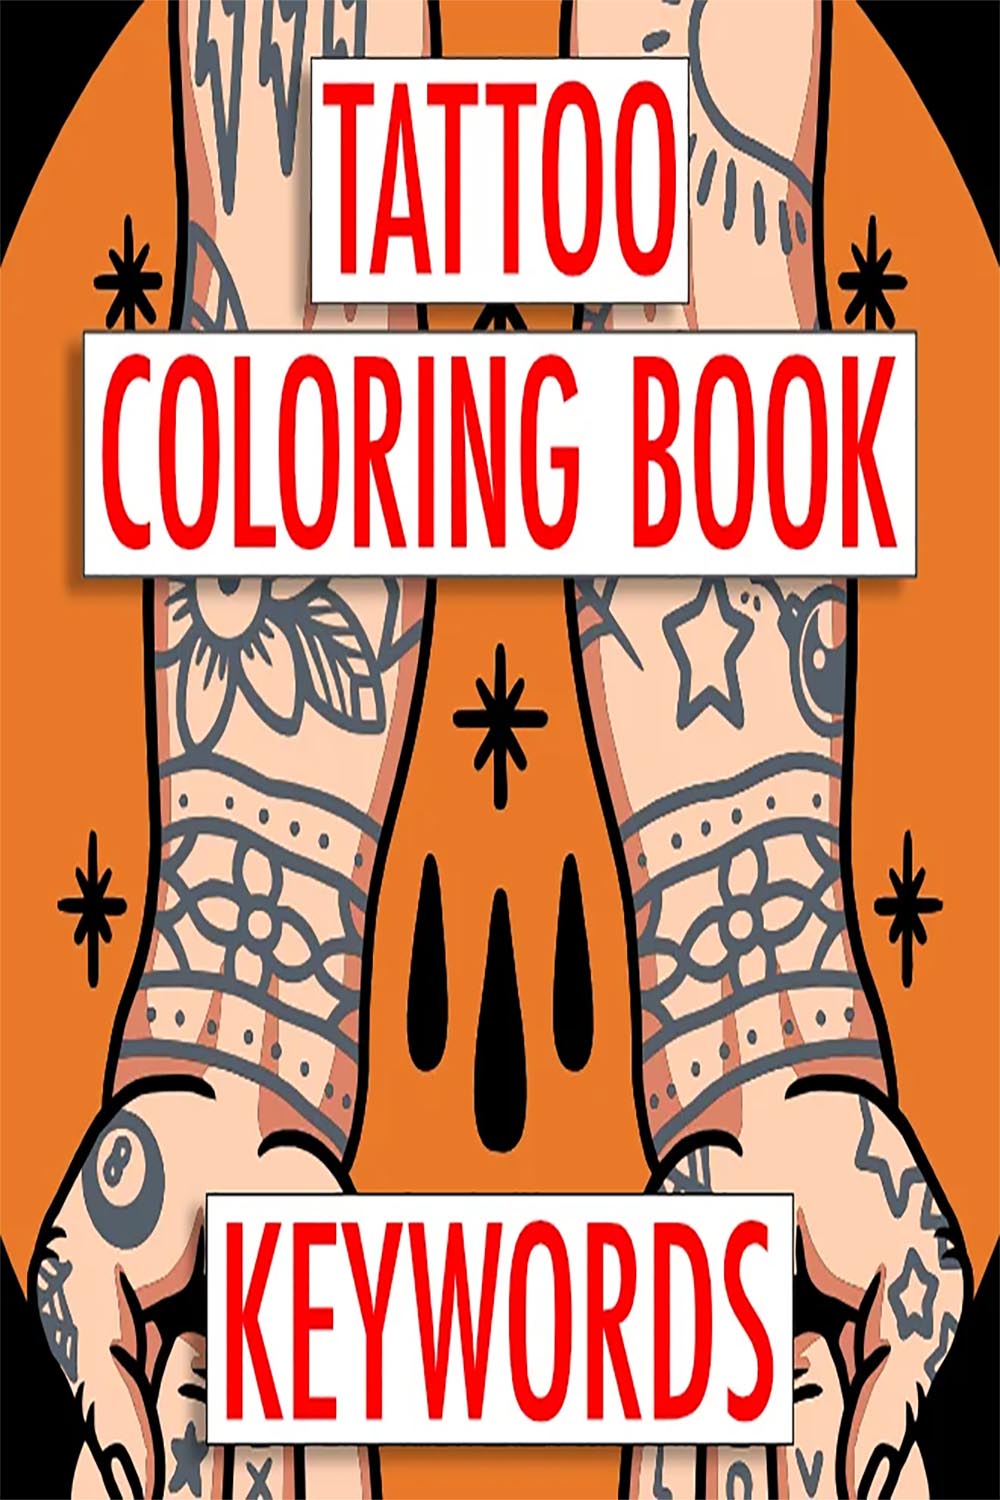 63 Tattoo Coloring Book Keywords pinterest preview image.